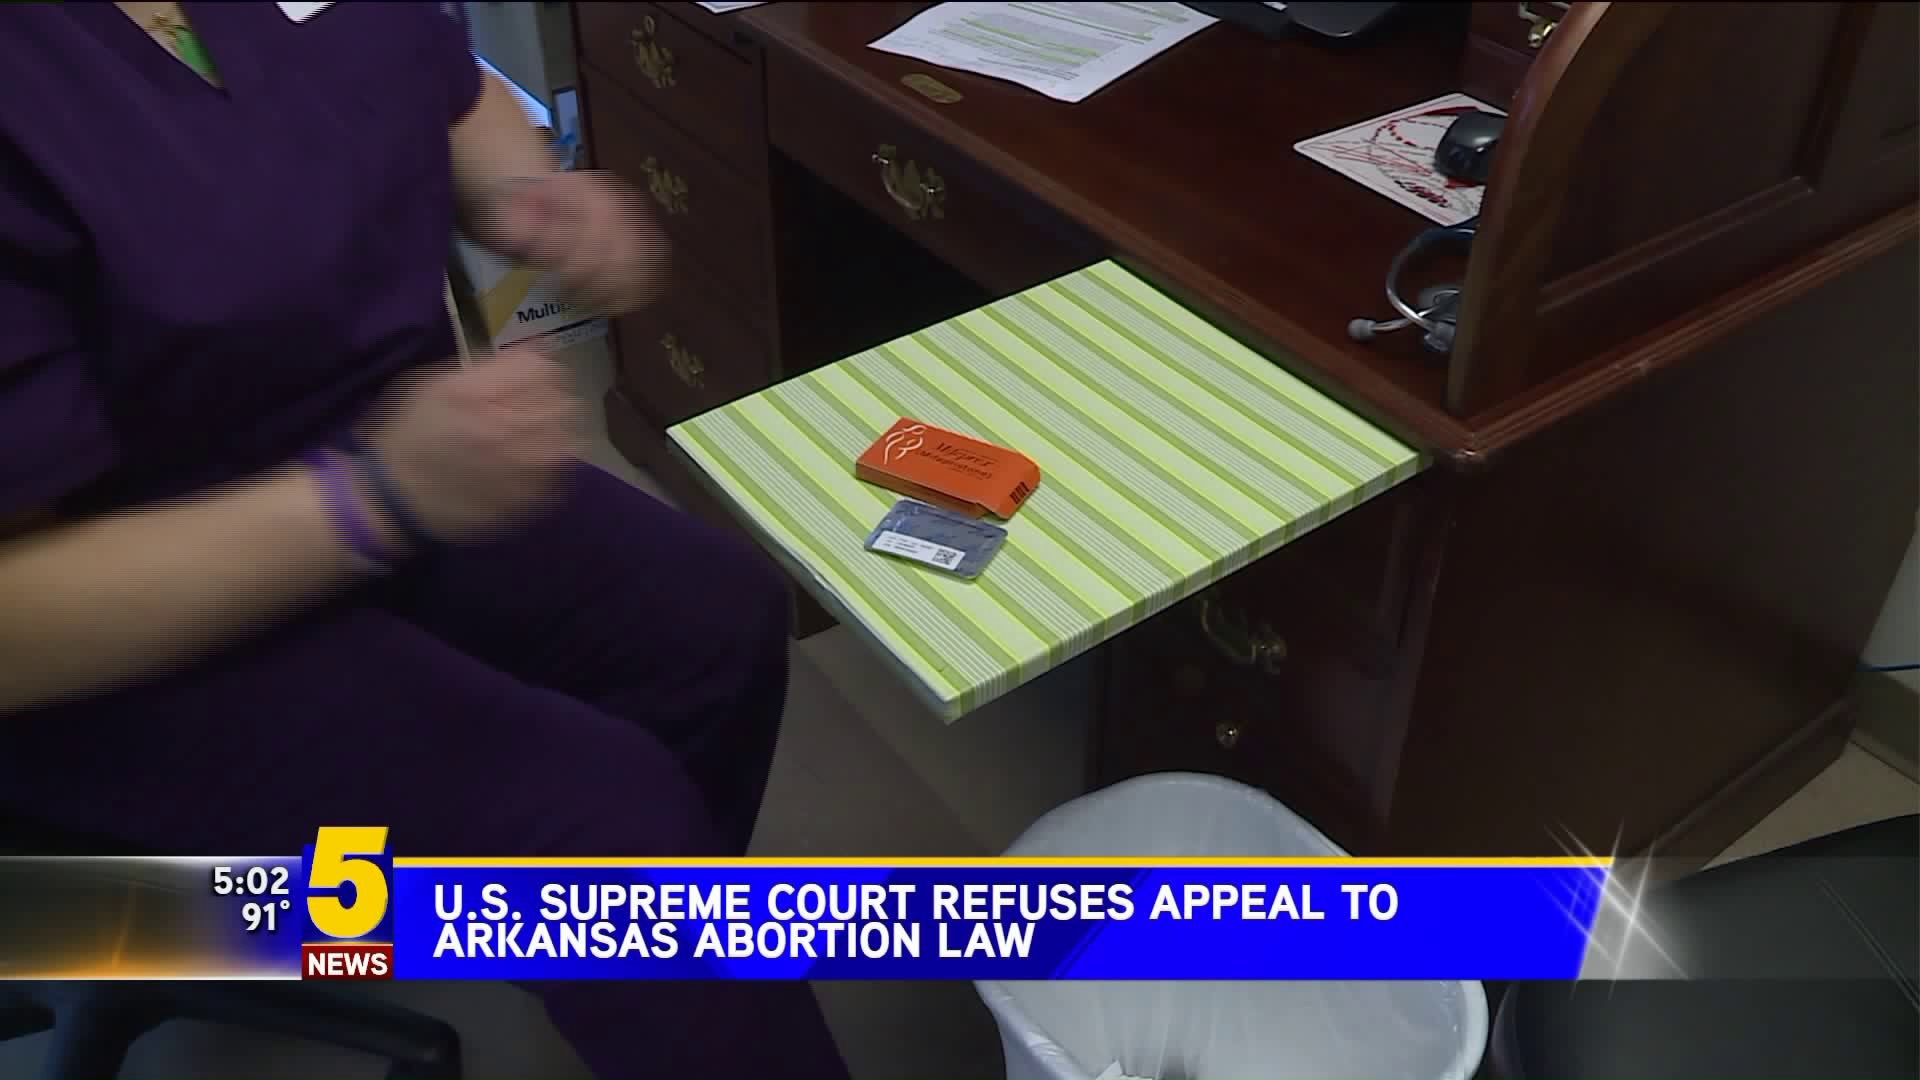 U.S. Supreme Court Refuses Appeal To Arkansas Abortion Law